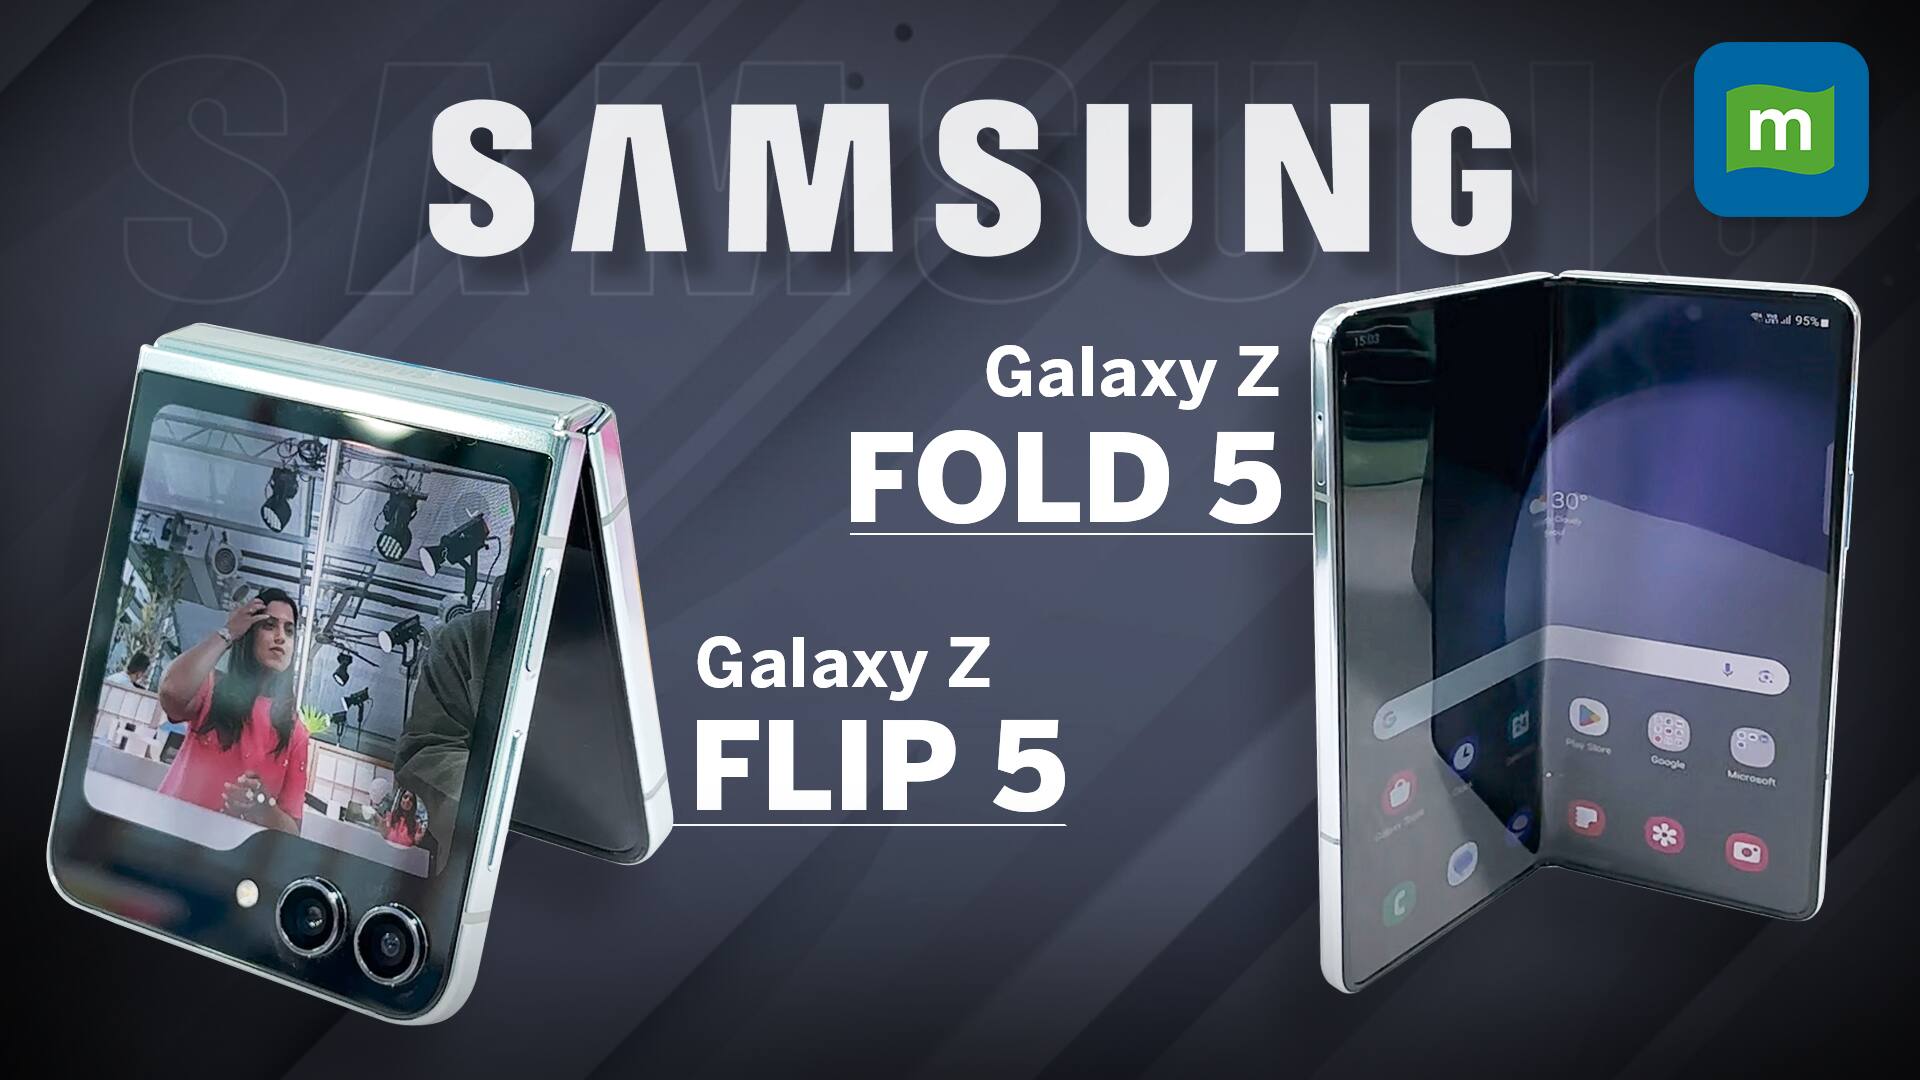 Samsung Galaxy Z Flip5 and Fold5: Here's what it offers